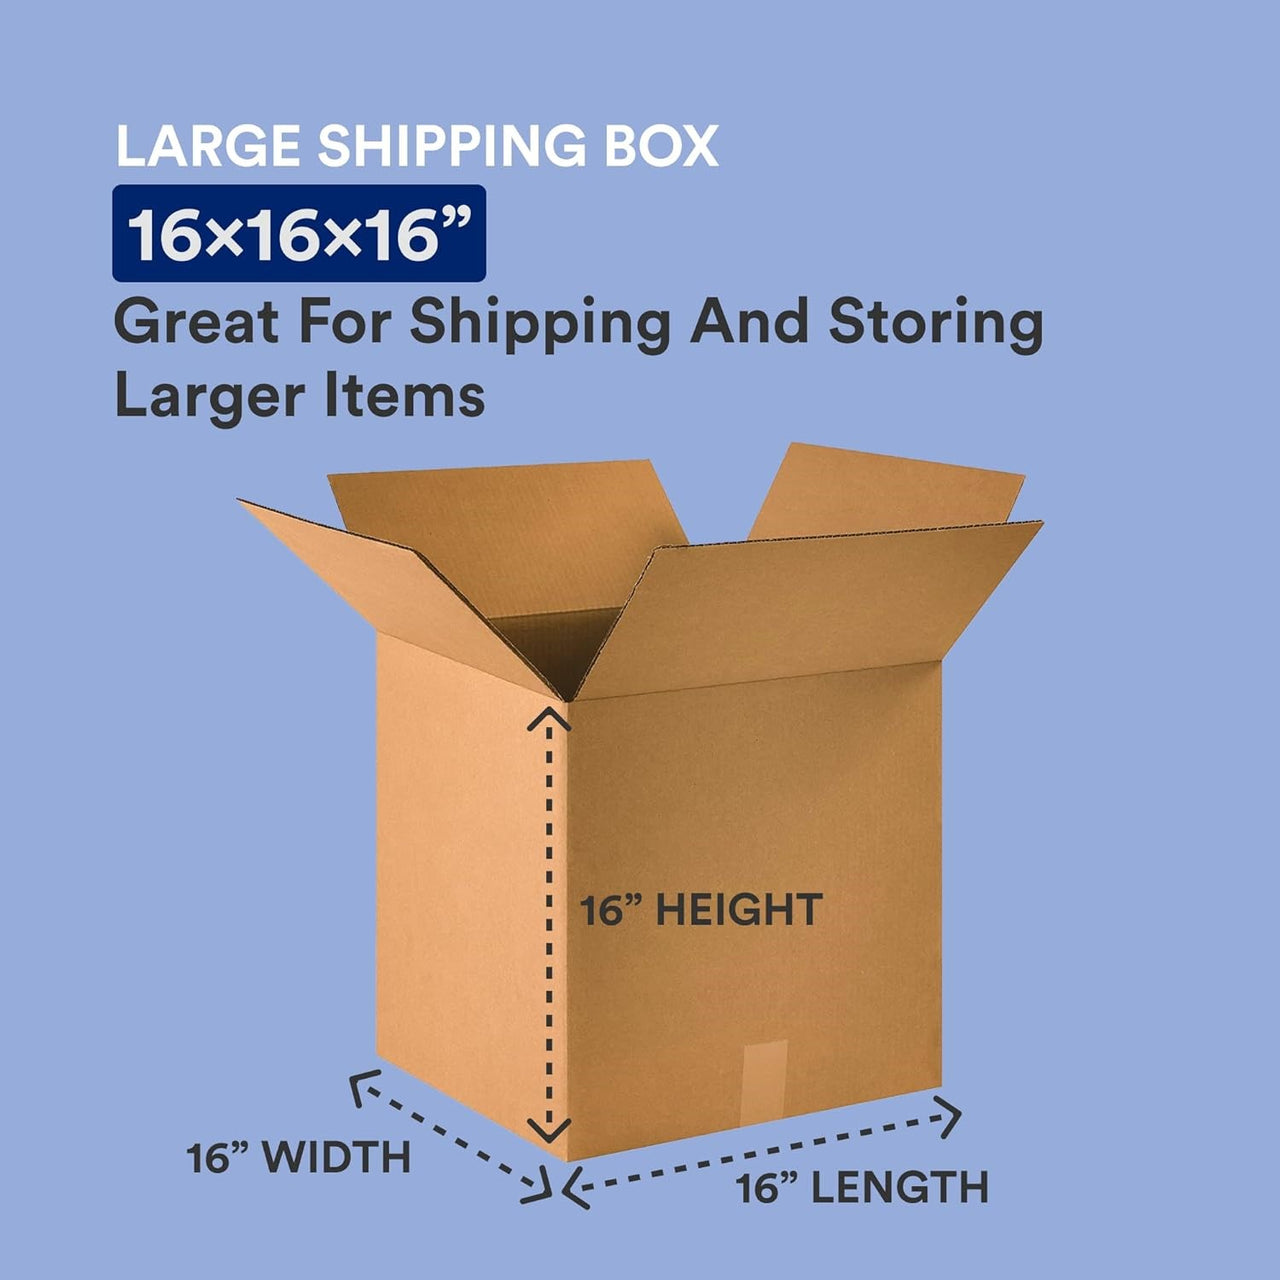 10 Pack Shipping Boxes 16"L x 16"W x 16"H Corrugated Cardboard Box for Packing Moving Storage